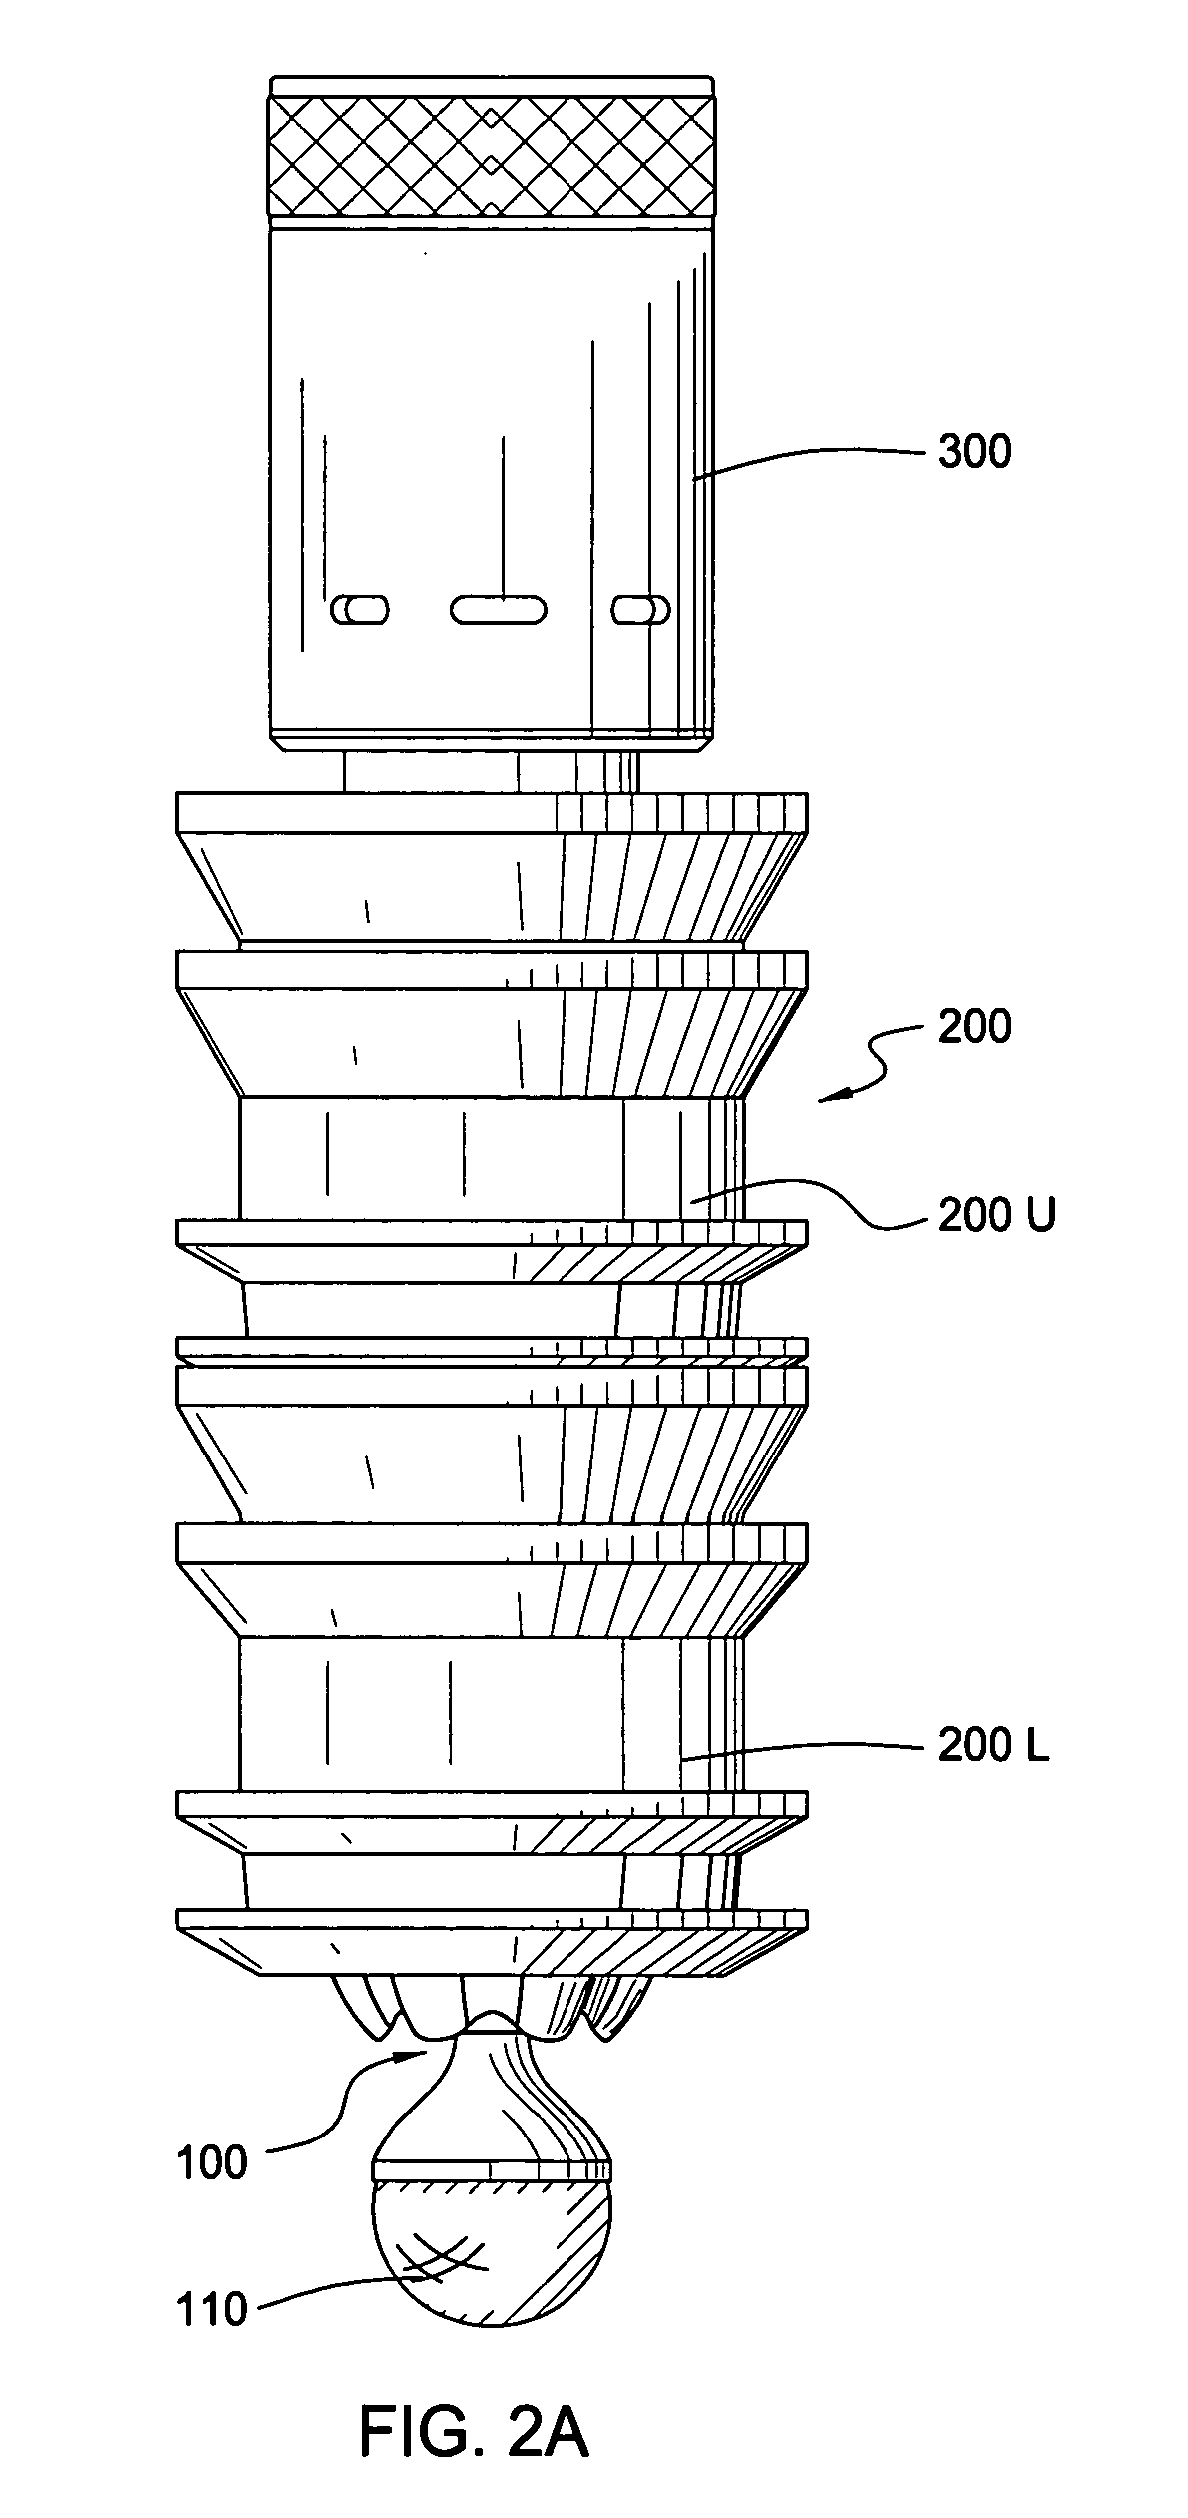 Apparatus for releasing a ball into a wellbore